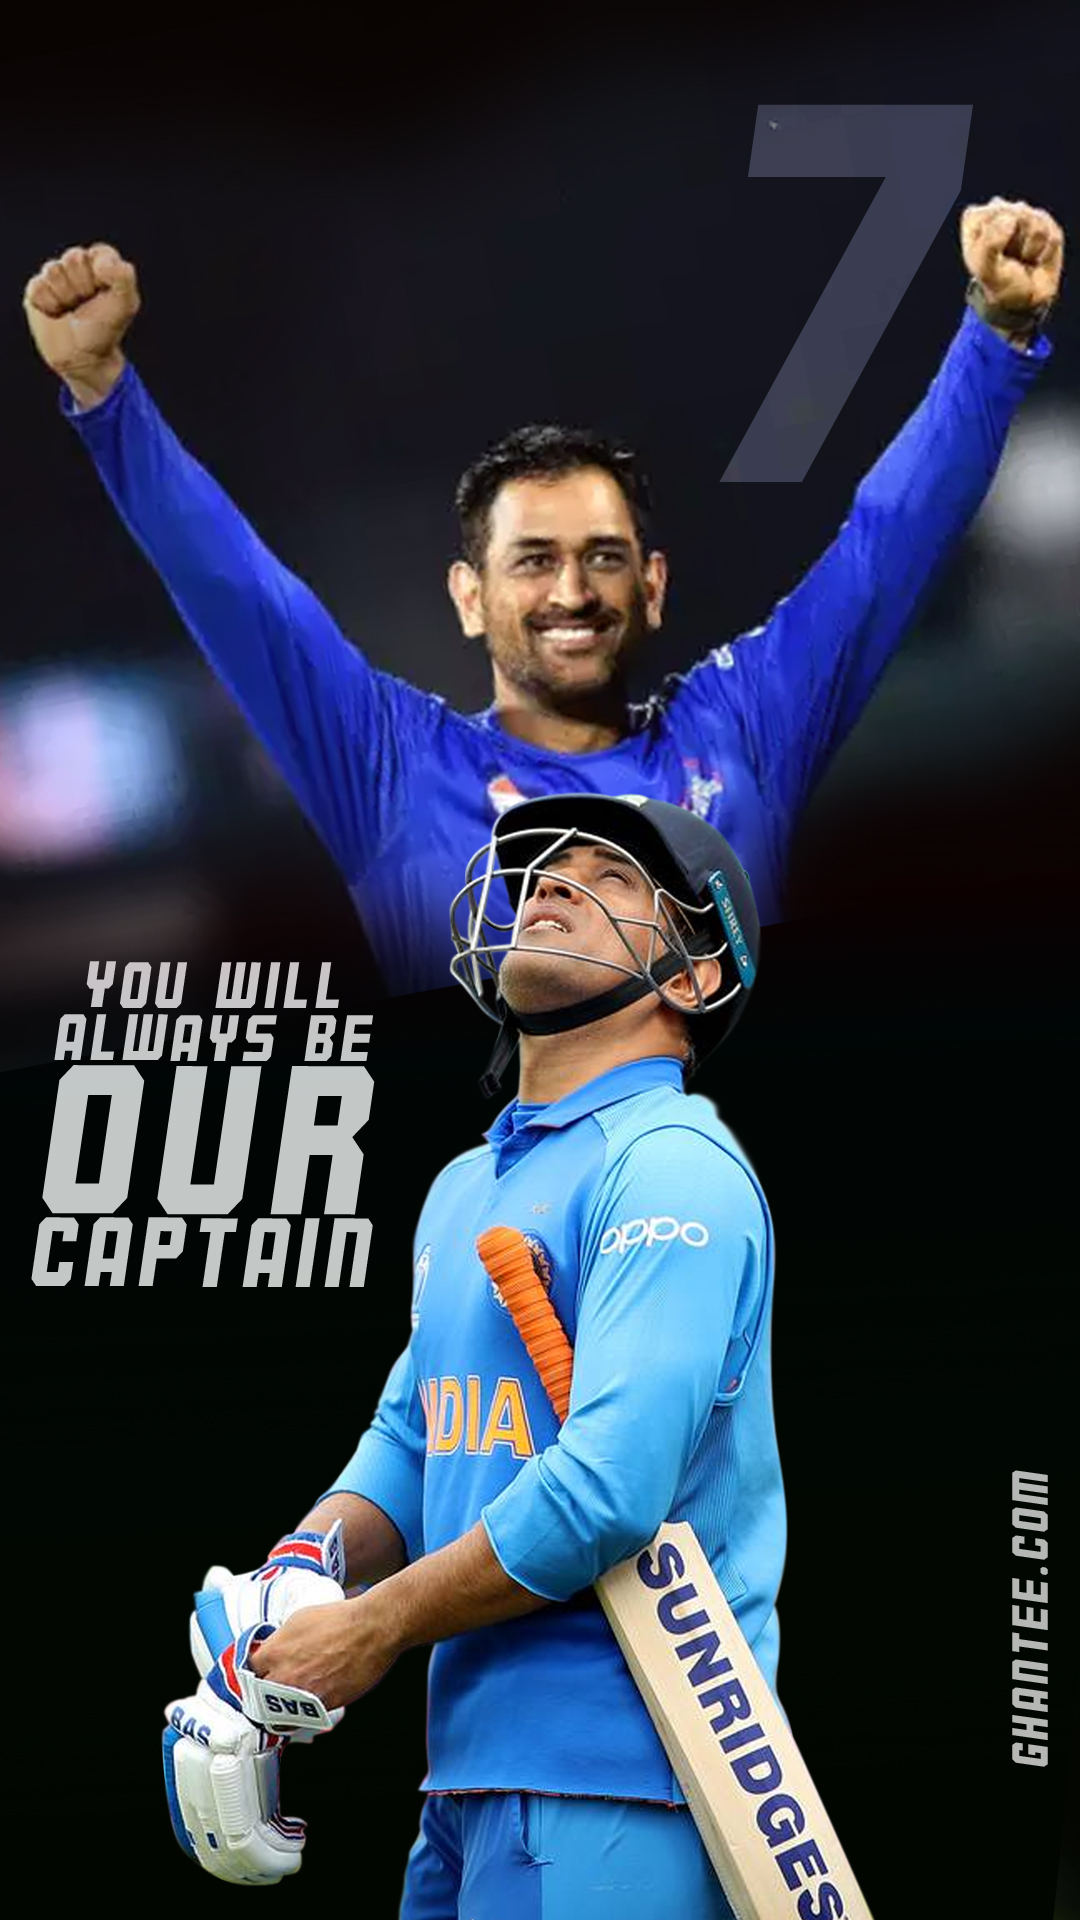 Ms Dhoni Wallpapers